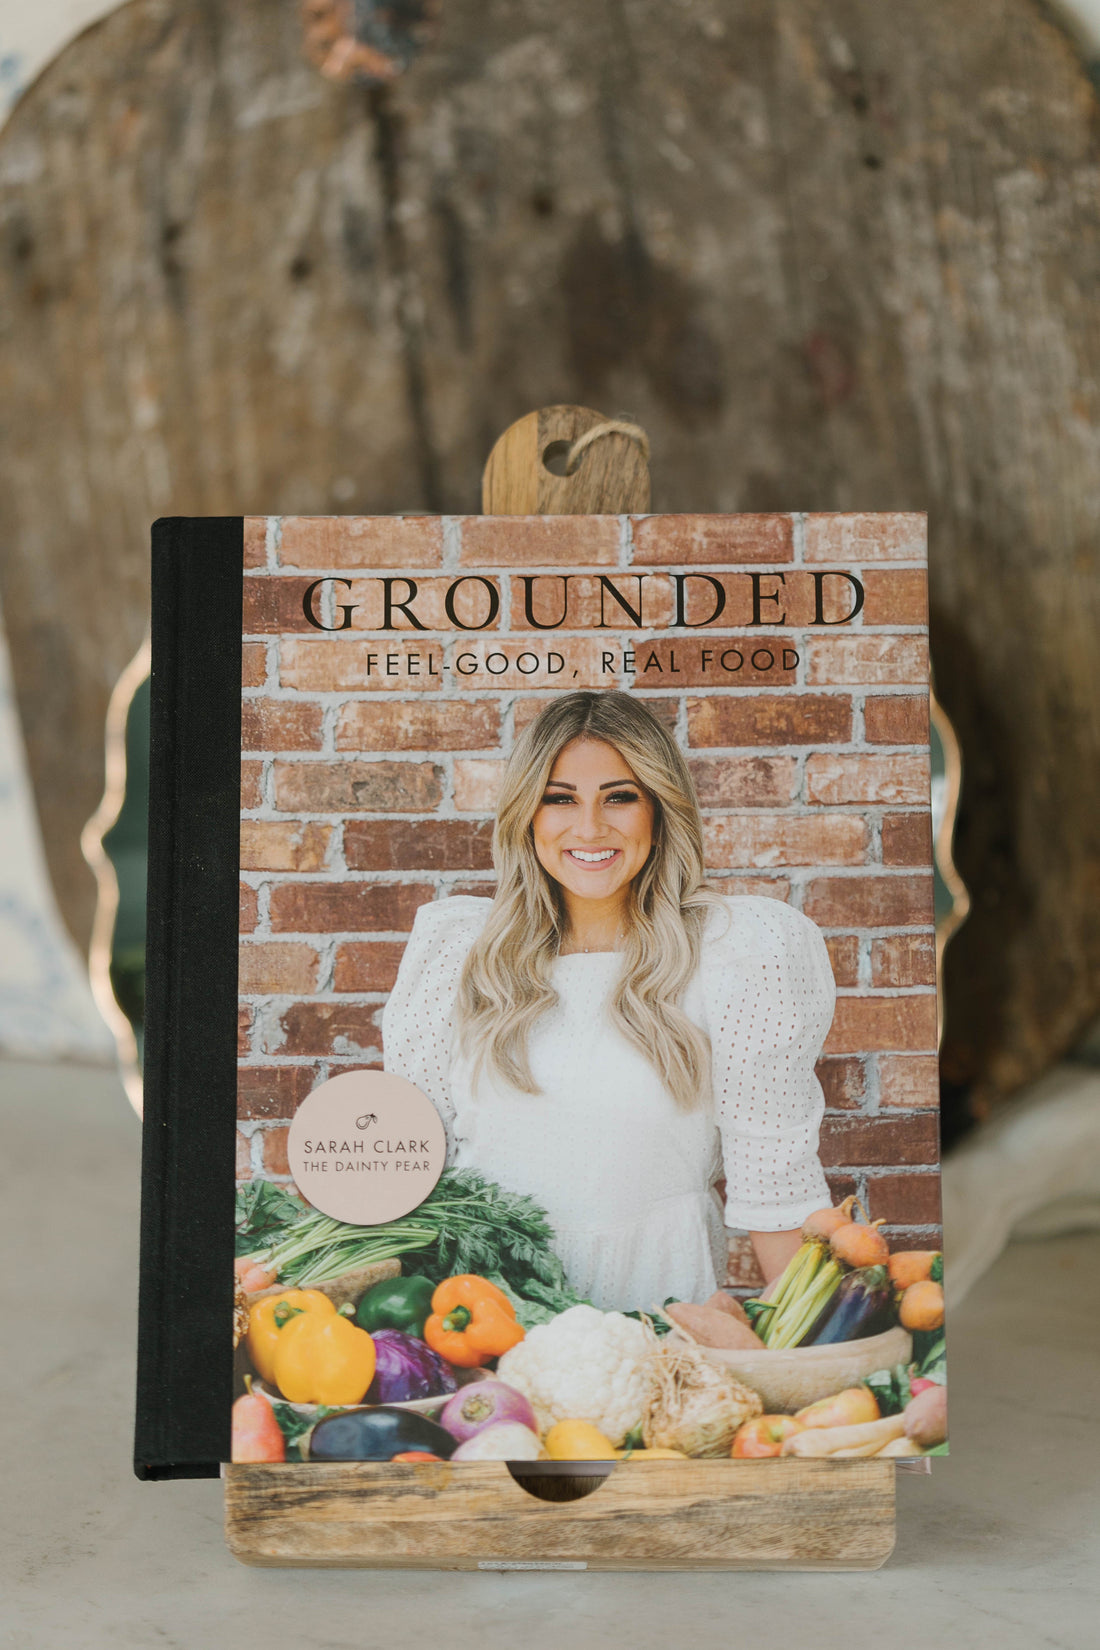 Grounded “Feel-Good, Real Food” Cookbook